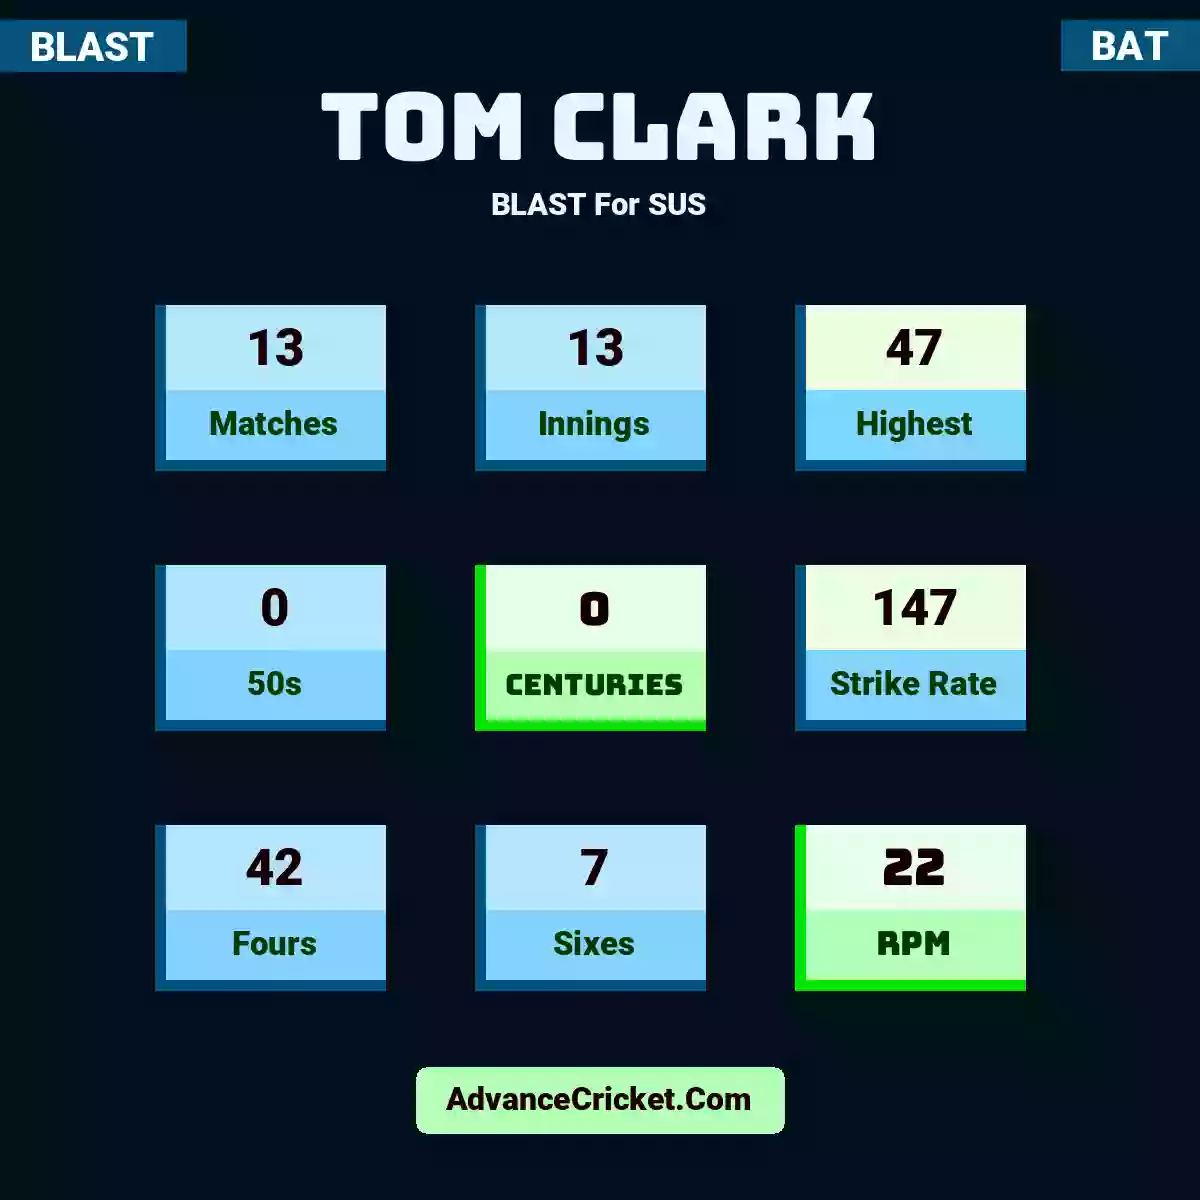 Tom Clark BLAST  For SUS, Tom Clark played 13 matches, scored 47 runs as highest, 0 half-centuries, and 0 centuries, with a strike rate of 147. T.Clark hit 42 fours and 7 sixes, with an RPM of 22.